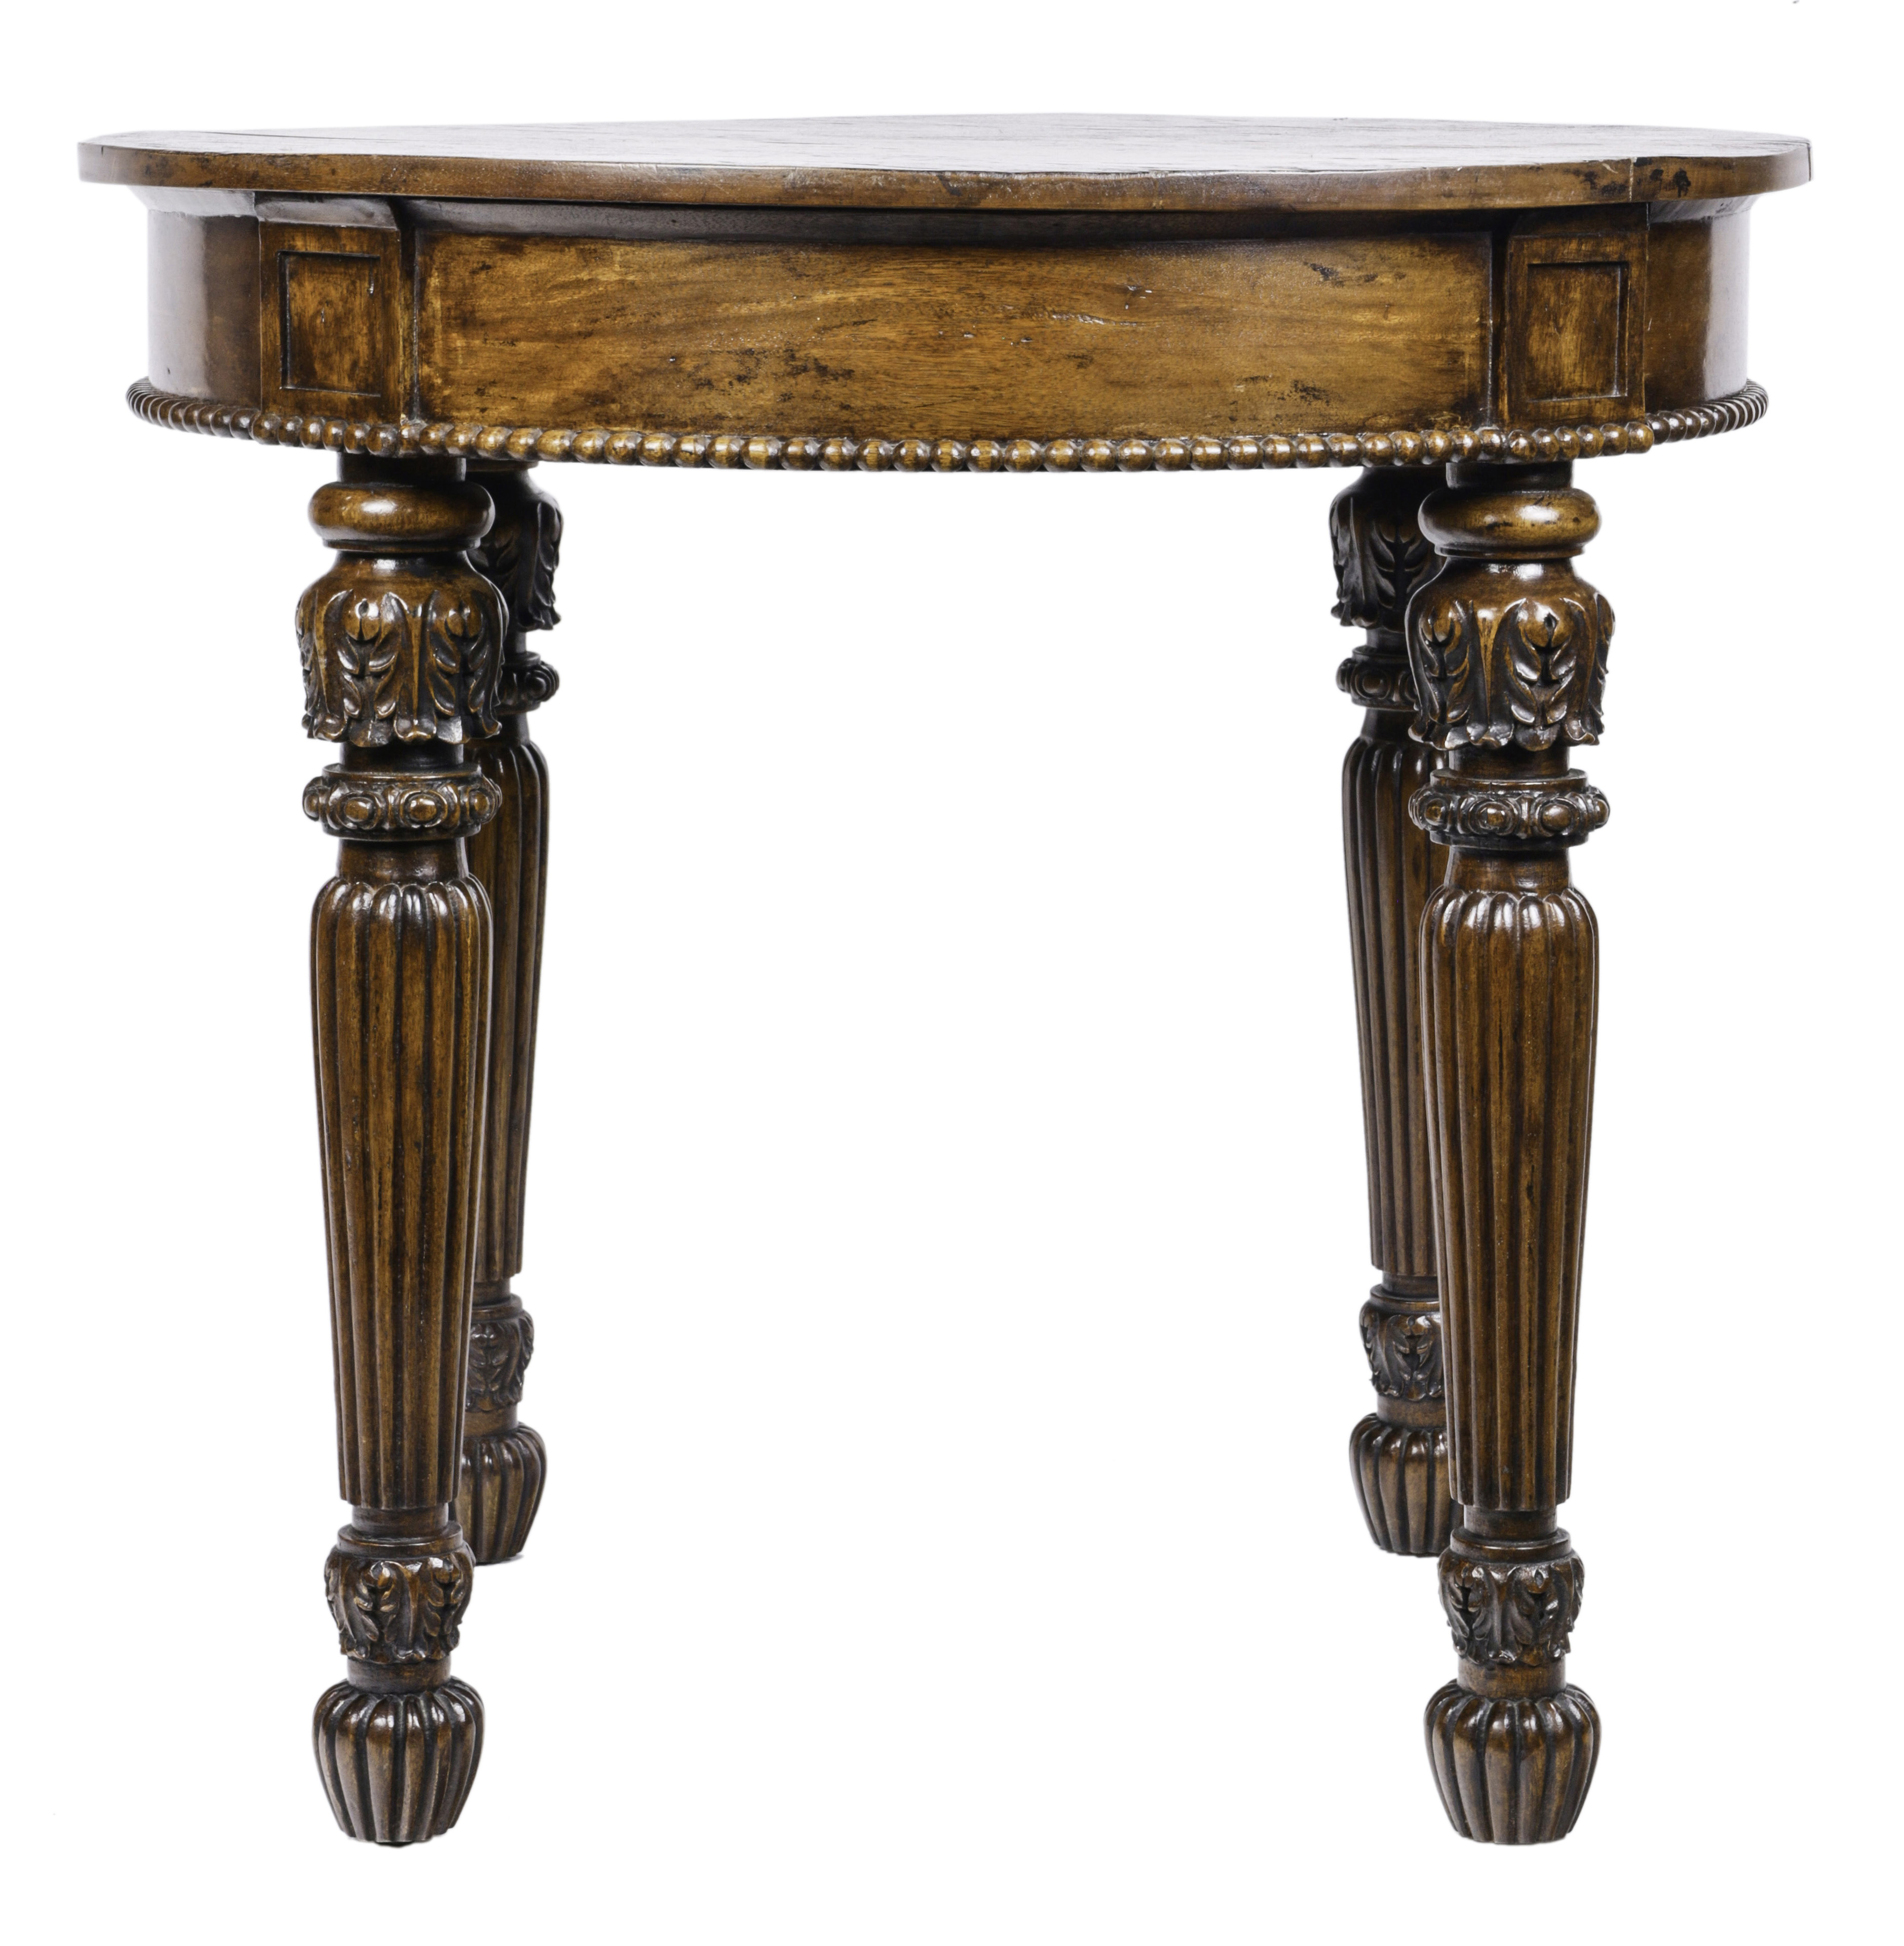 A LOUIS XVI STYLE OCCASIONAL TABLE 3a576f